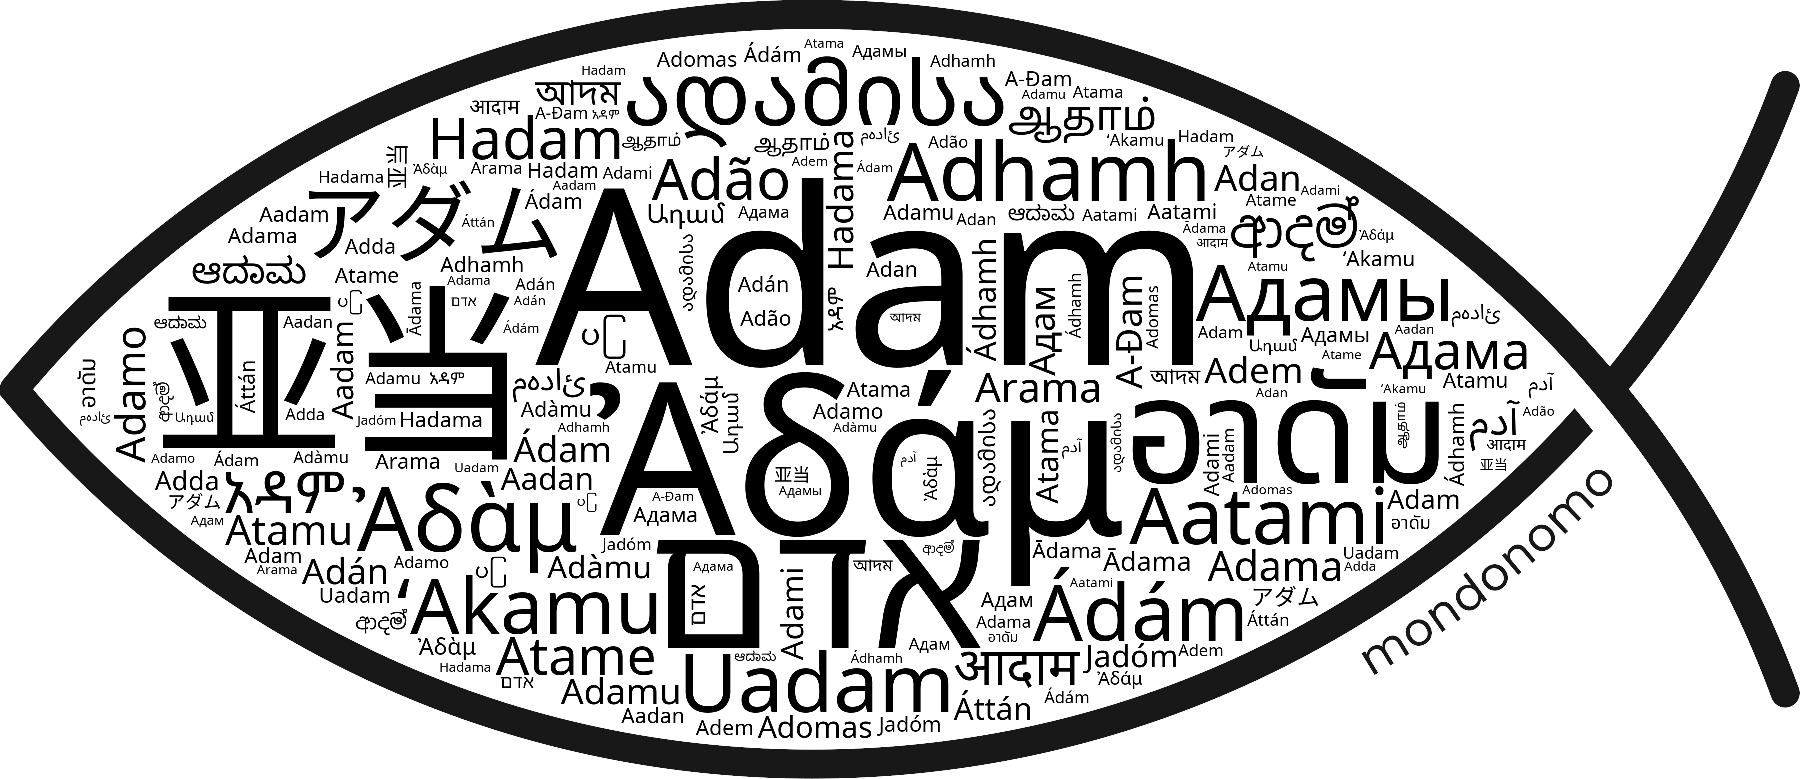 Name Adam in the world's Bibles